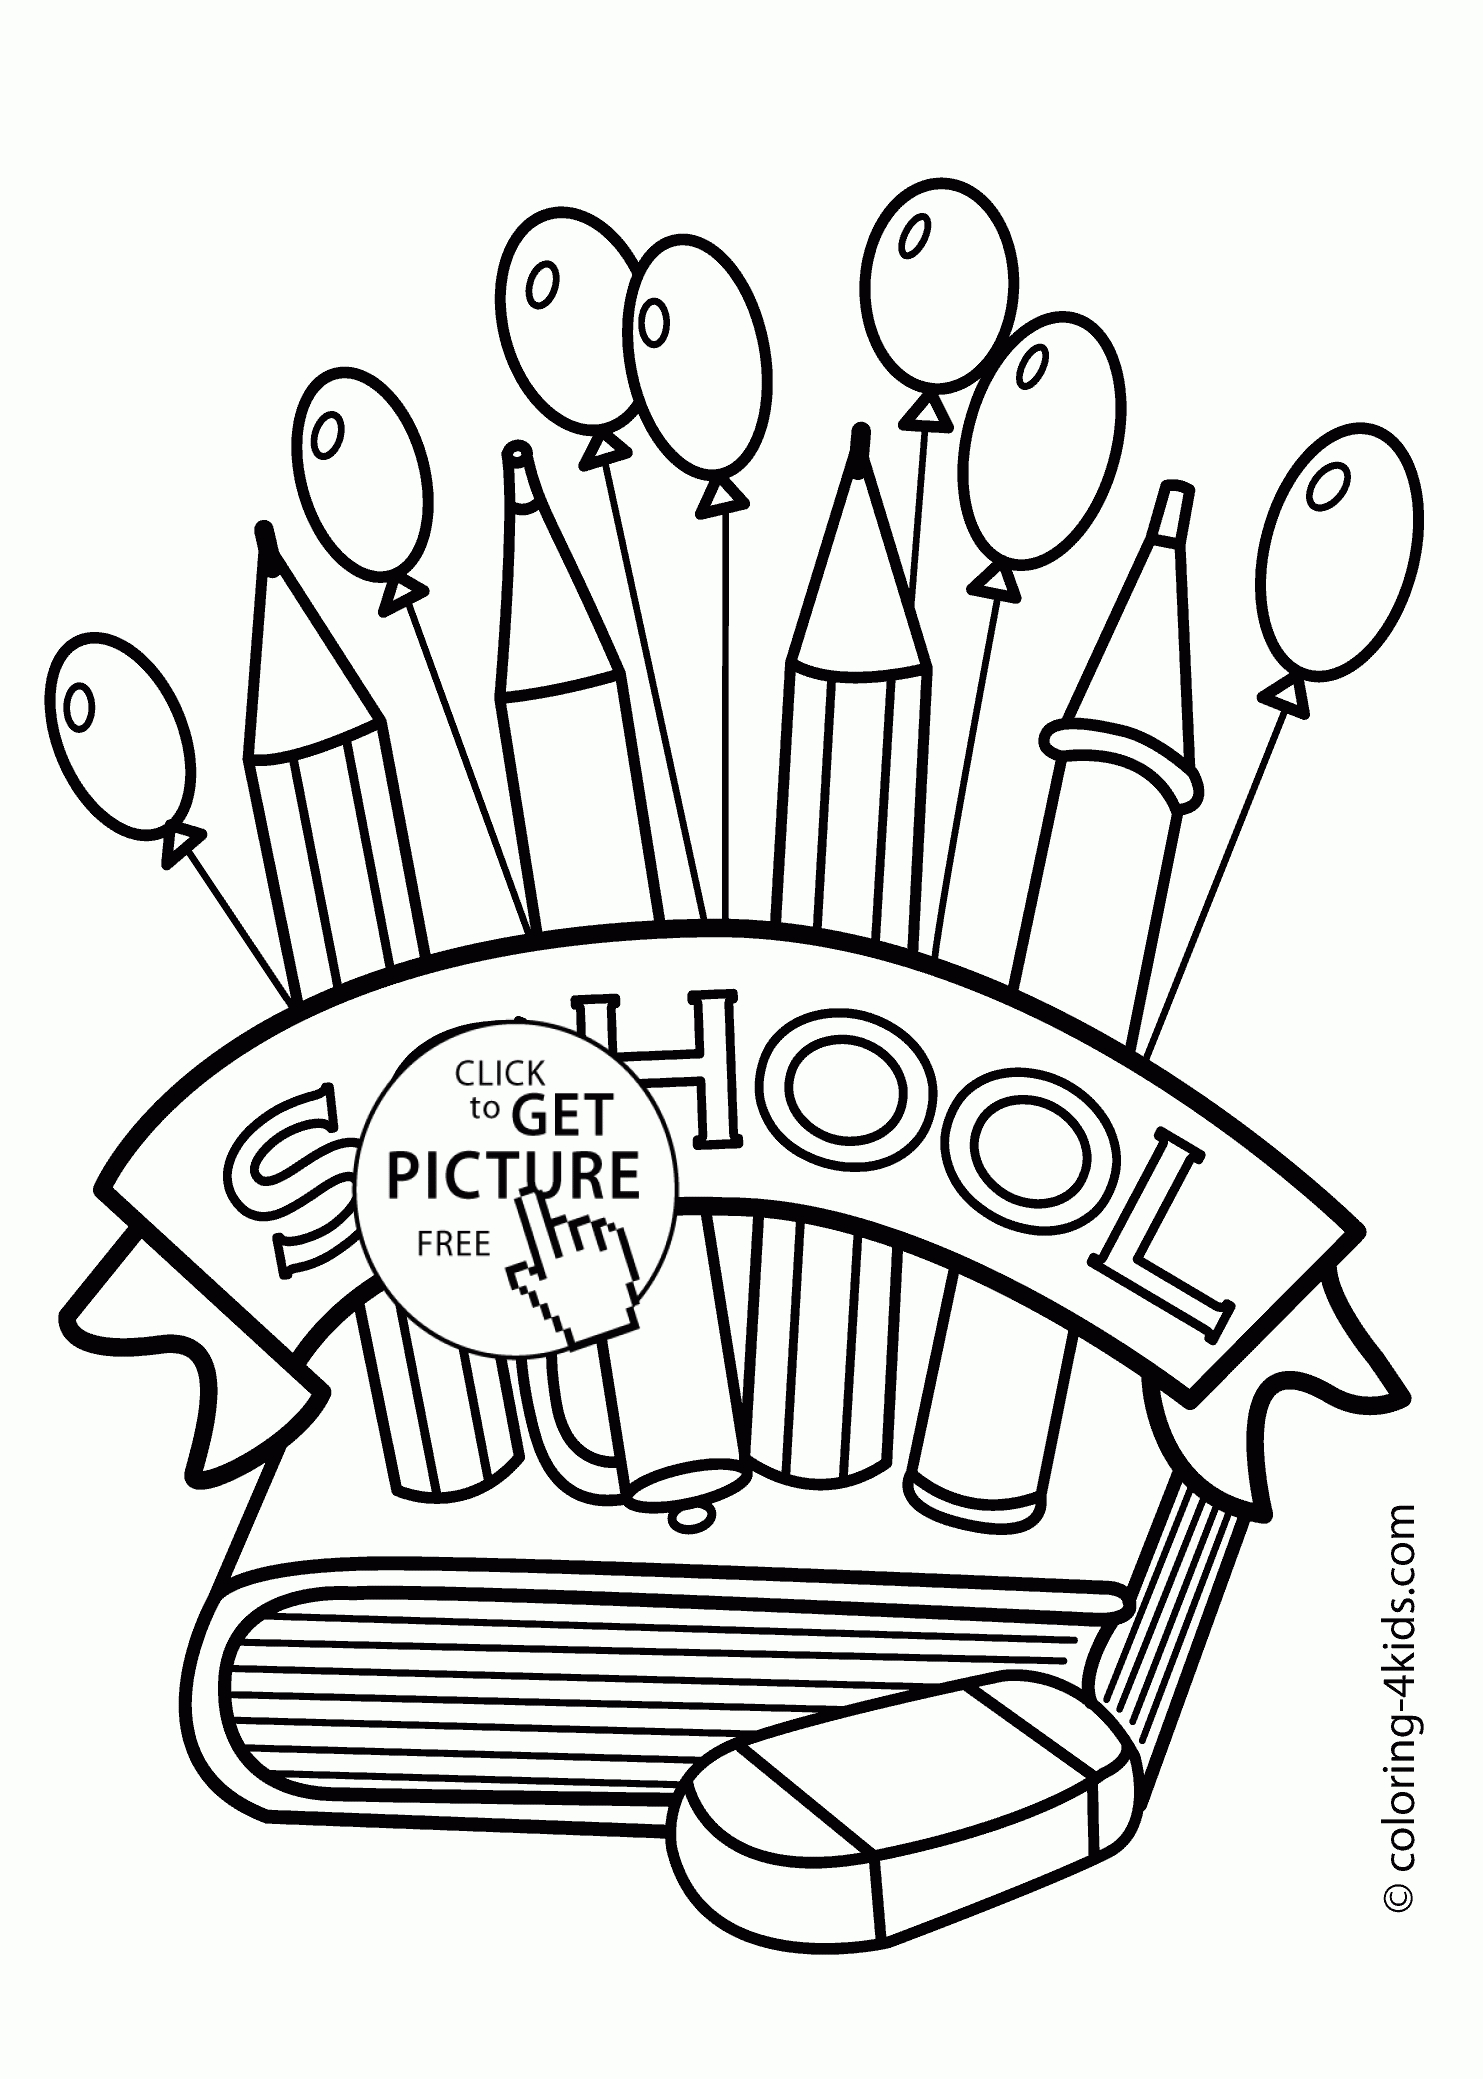 Coloring Ideas : School Remarkableoring Sheets For Kindergarten - Back To School Free Printable Coloring Pages